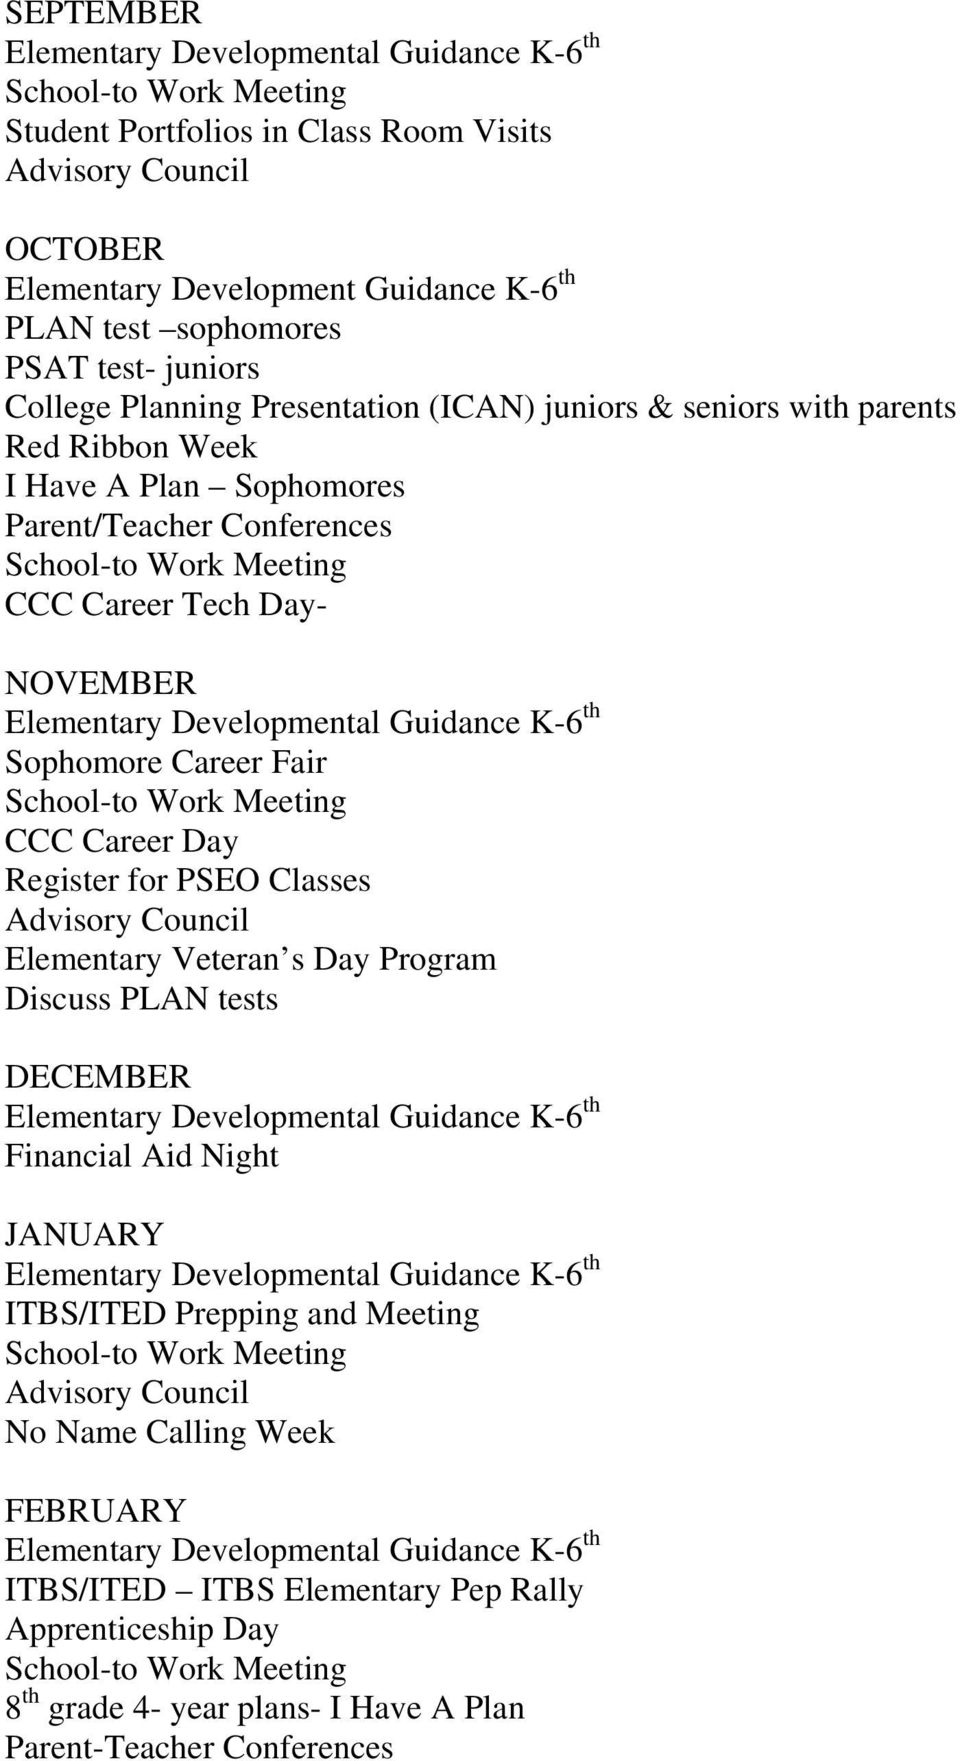 CCC Career Day Register for PSEO Classes Advisory Council Elementary Veteran s Day Program Discuss PLAN tests DECEMBER Financial Aid Night JANUARY ITBS/ITED Prepping and